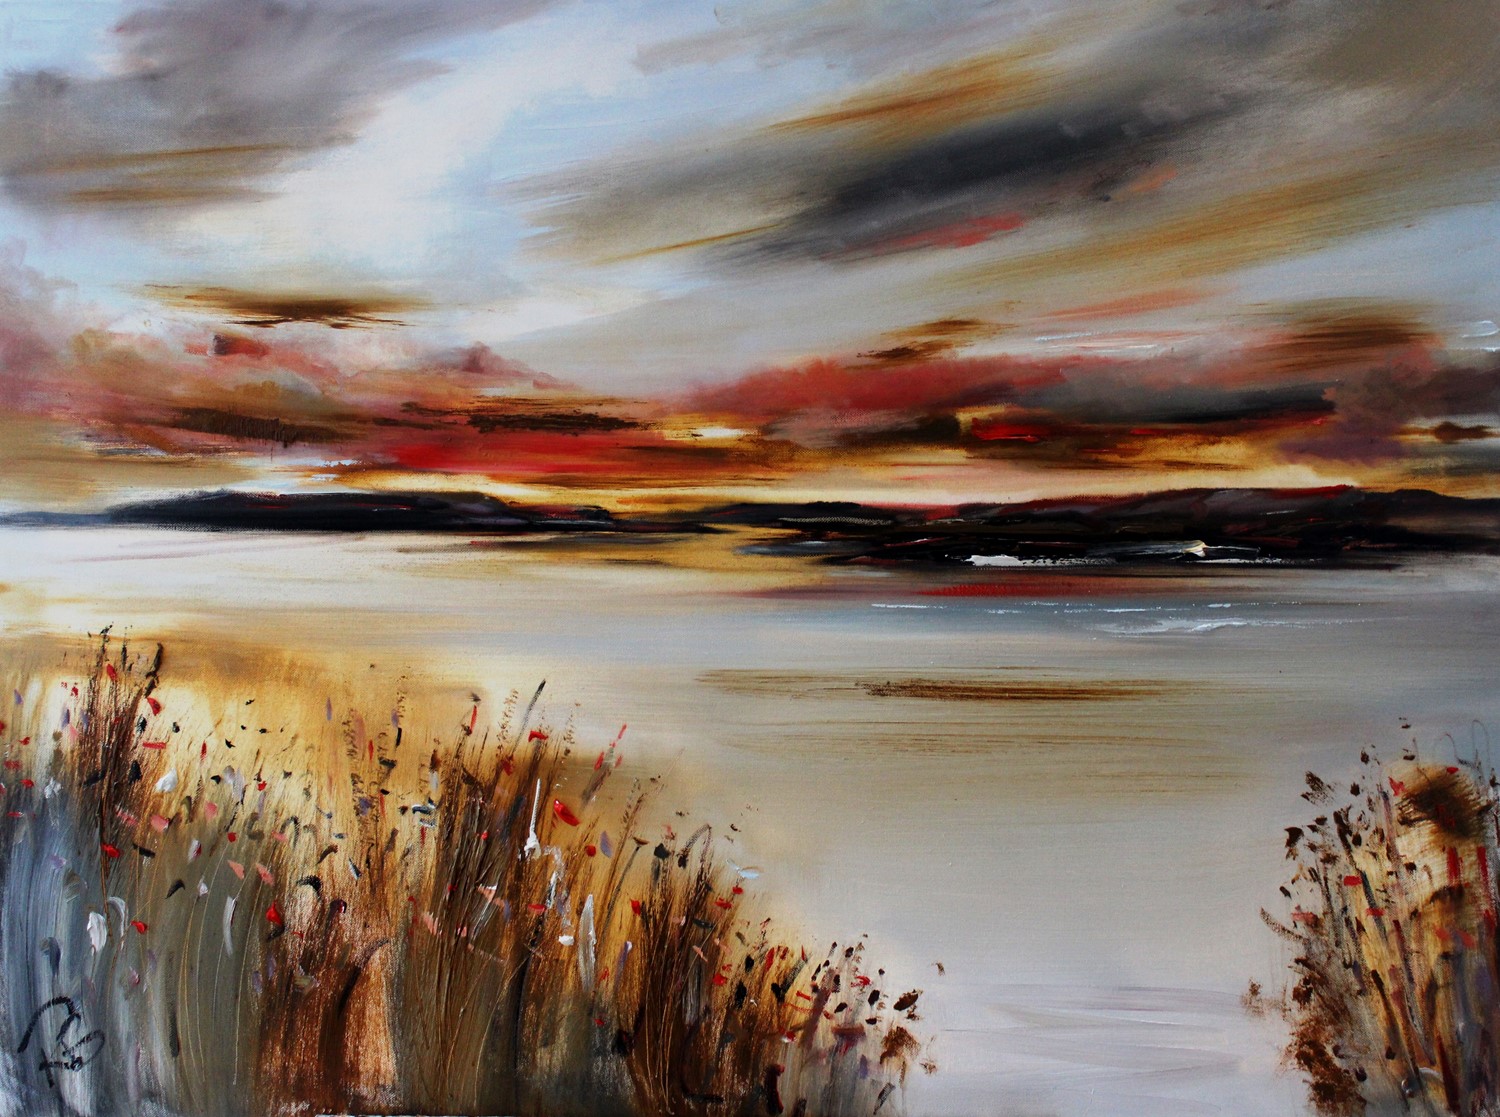 'A Glow over the Isles' by artist Rosanne Barr